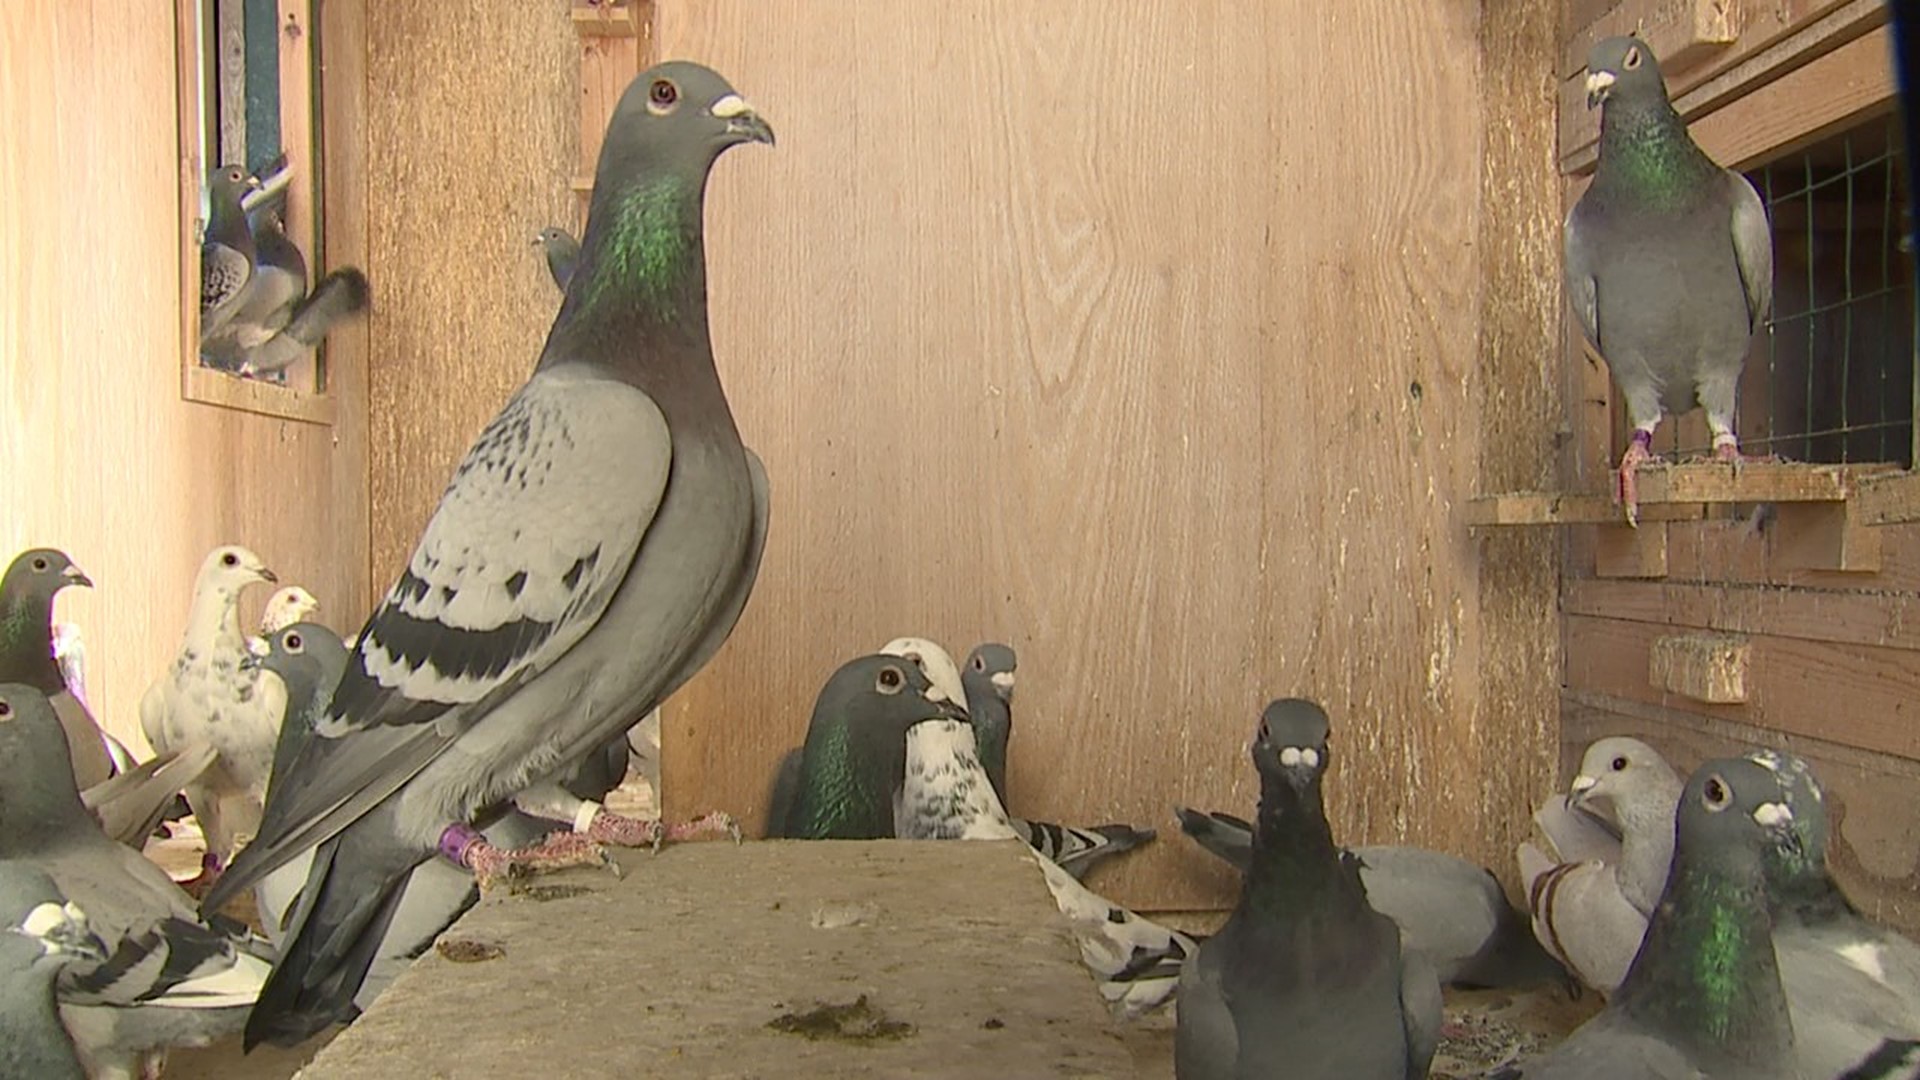 The Moline-East Moline Pigeon Racing Club raises and trains pigeons who race hundreds of miles across the country to come home.